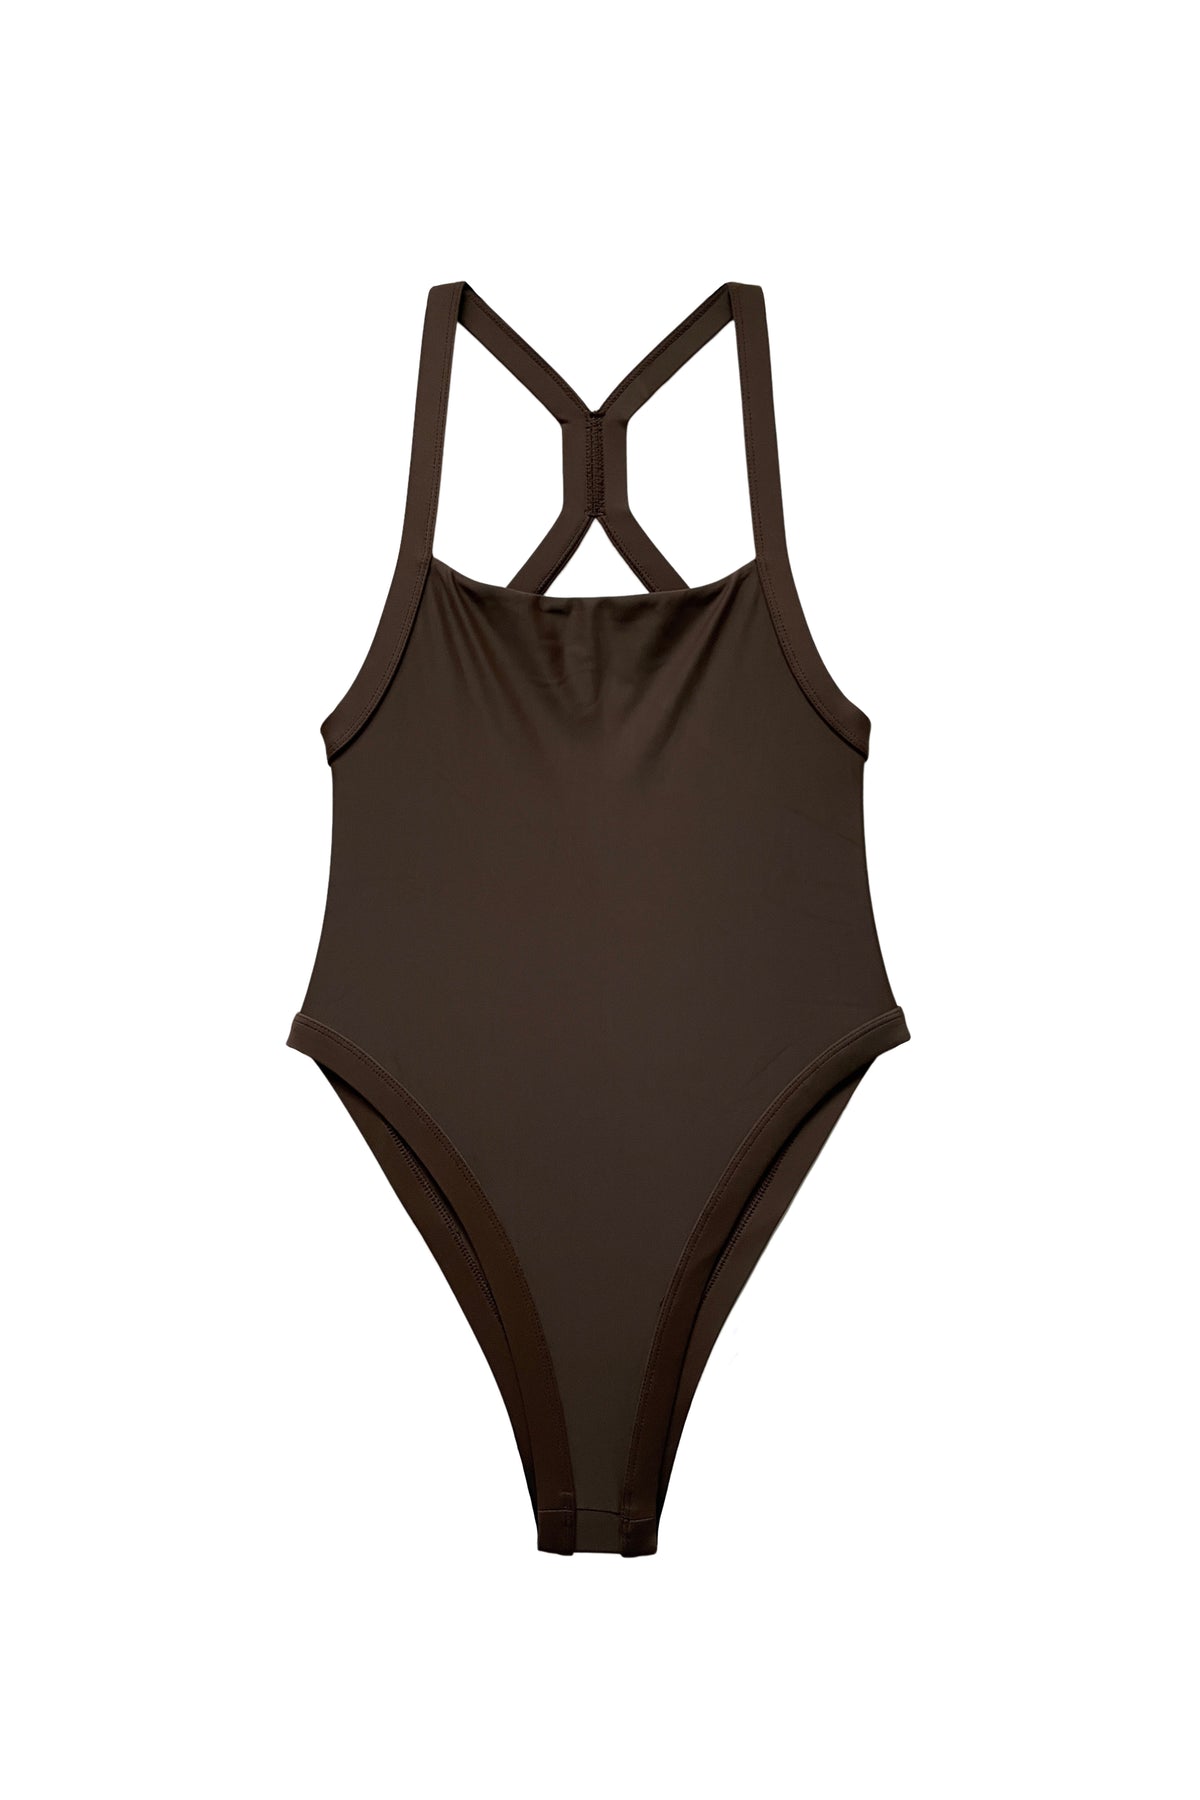 Ryder One Piece Swimsuit // Cacao